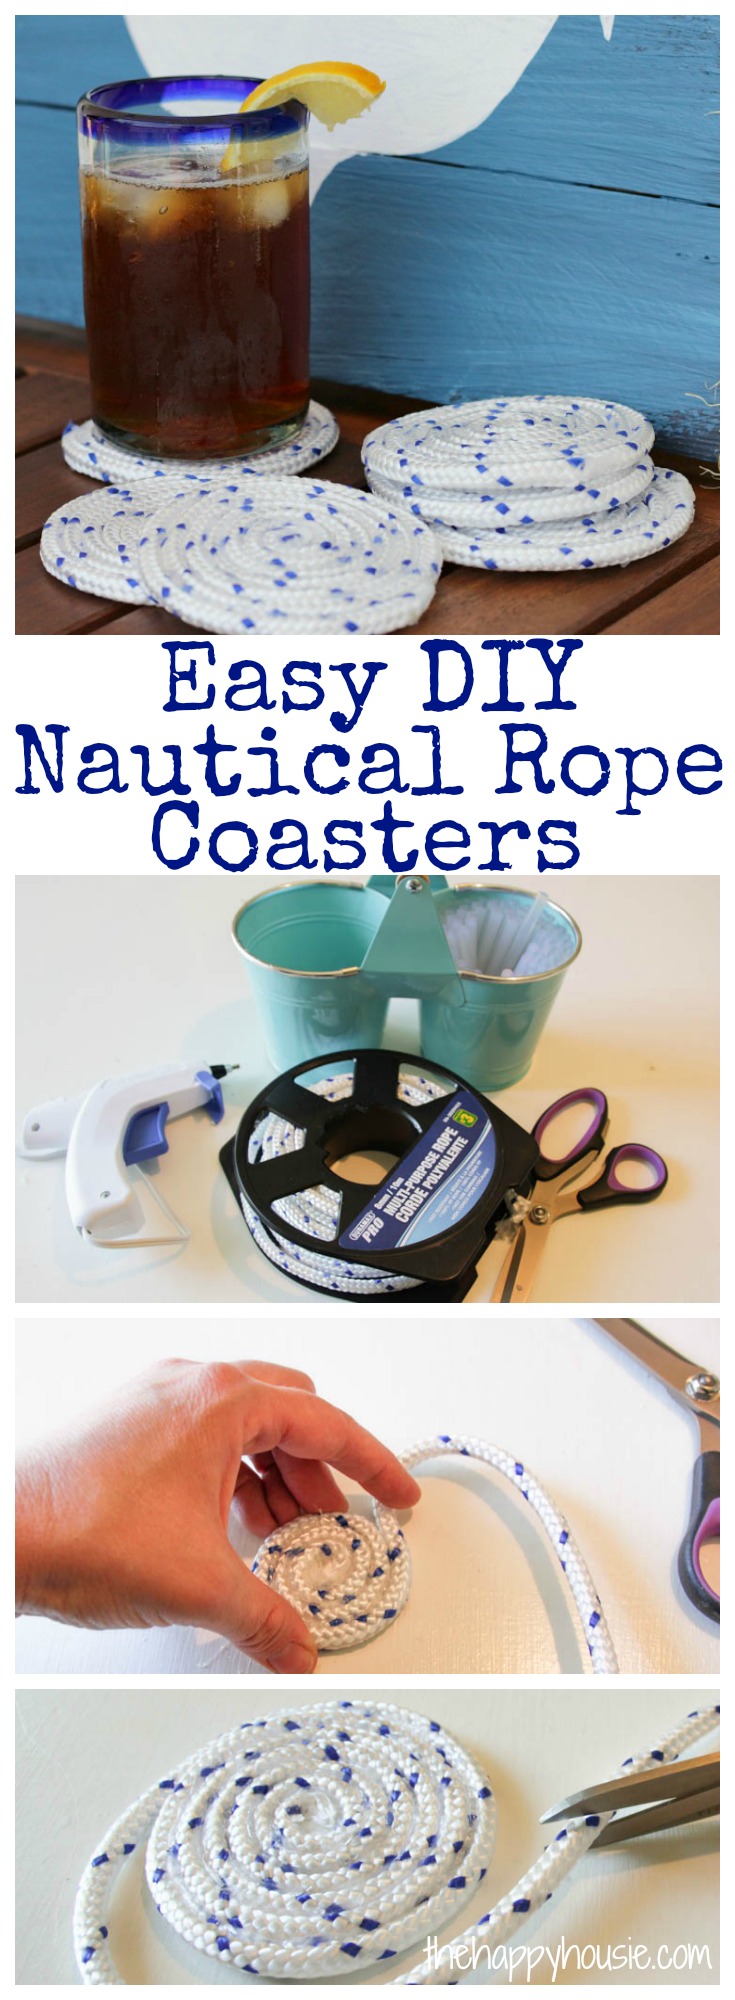 Super easy tutorial for how to make your own adorable outdoor coasters using nautical rope at thehappyhousie.com